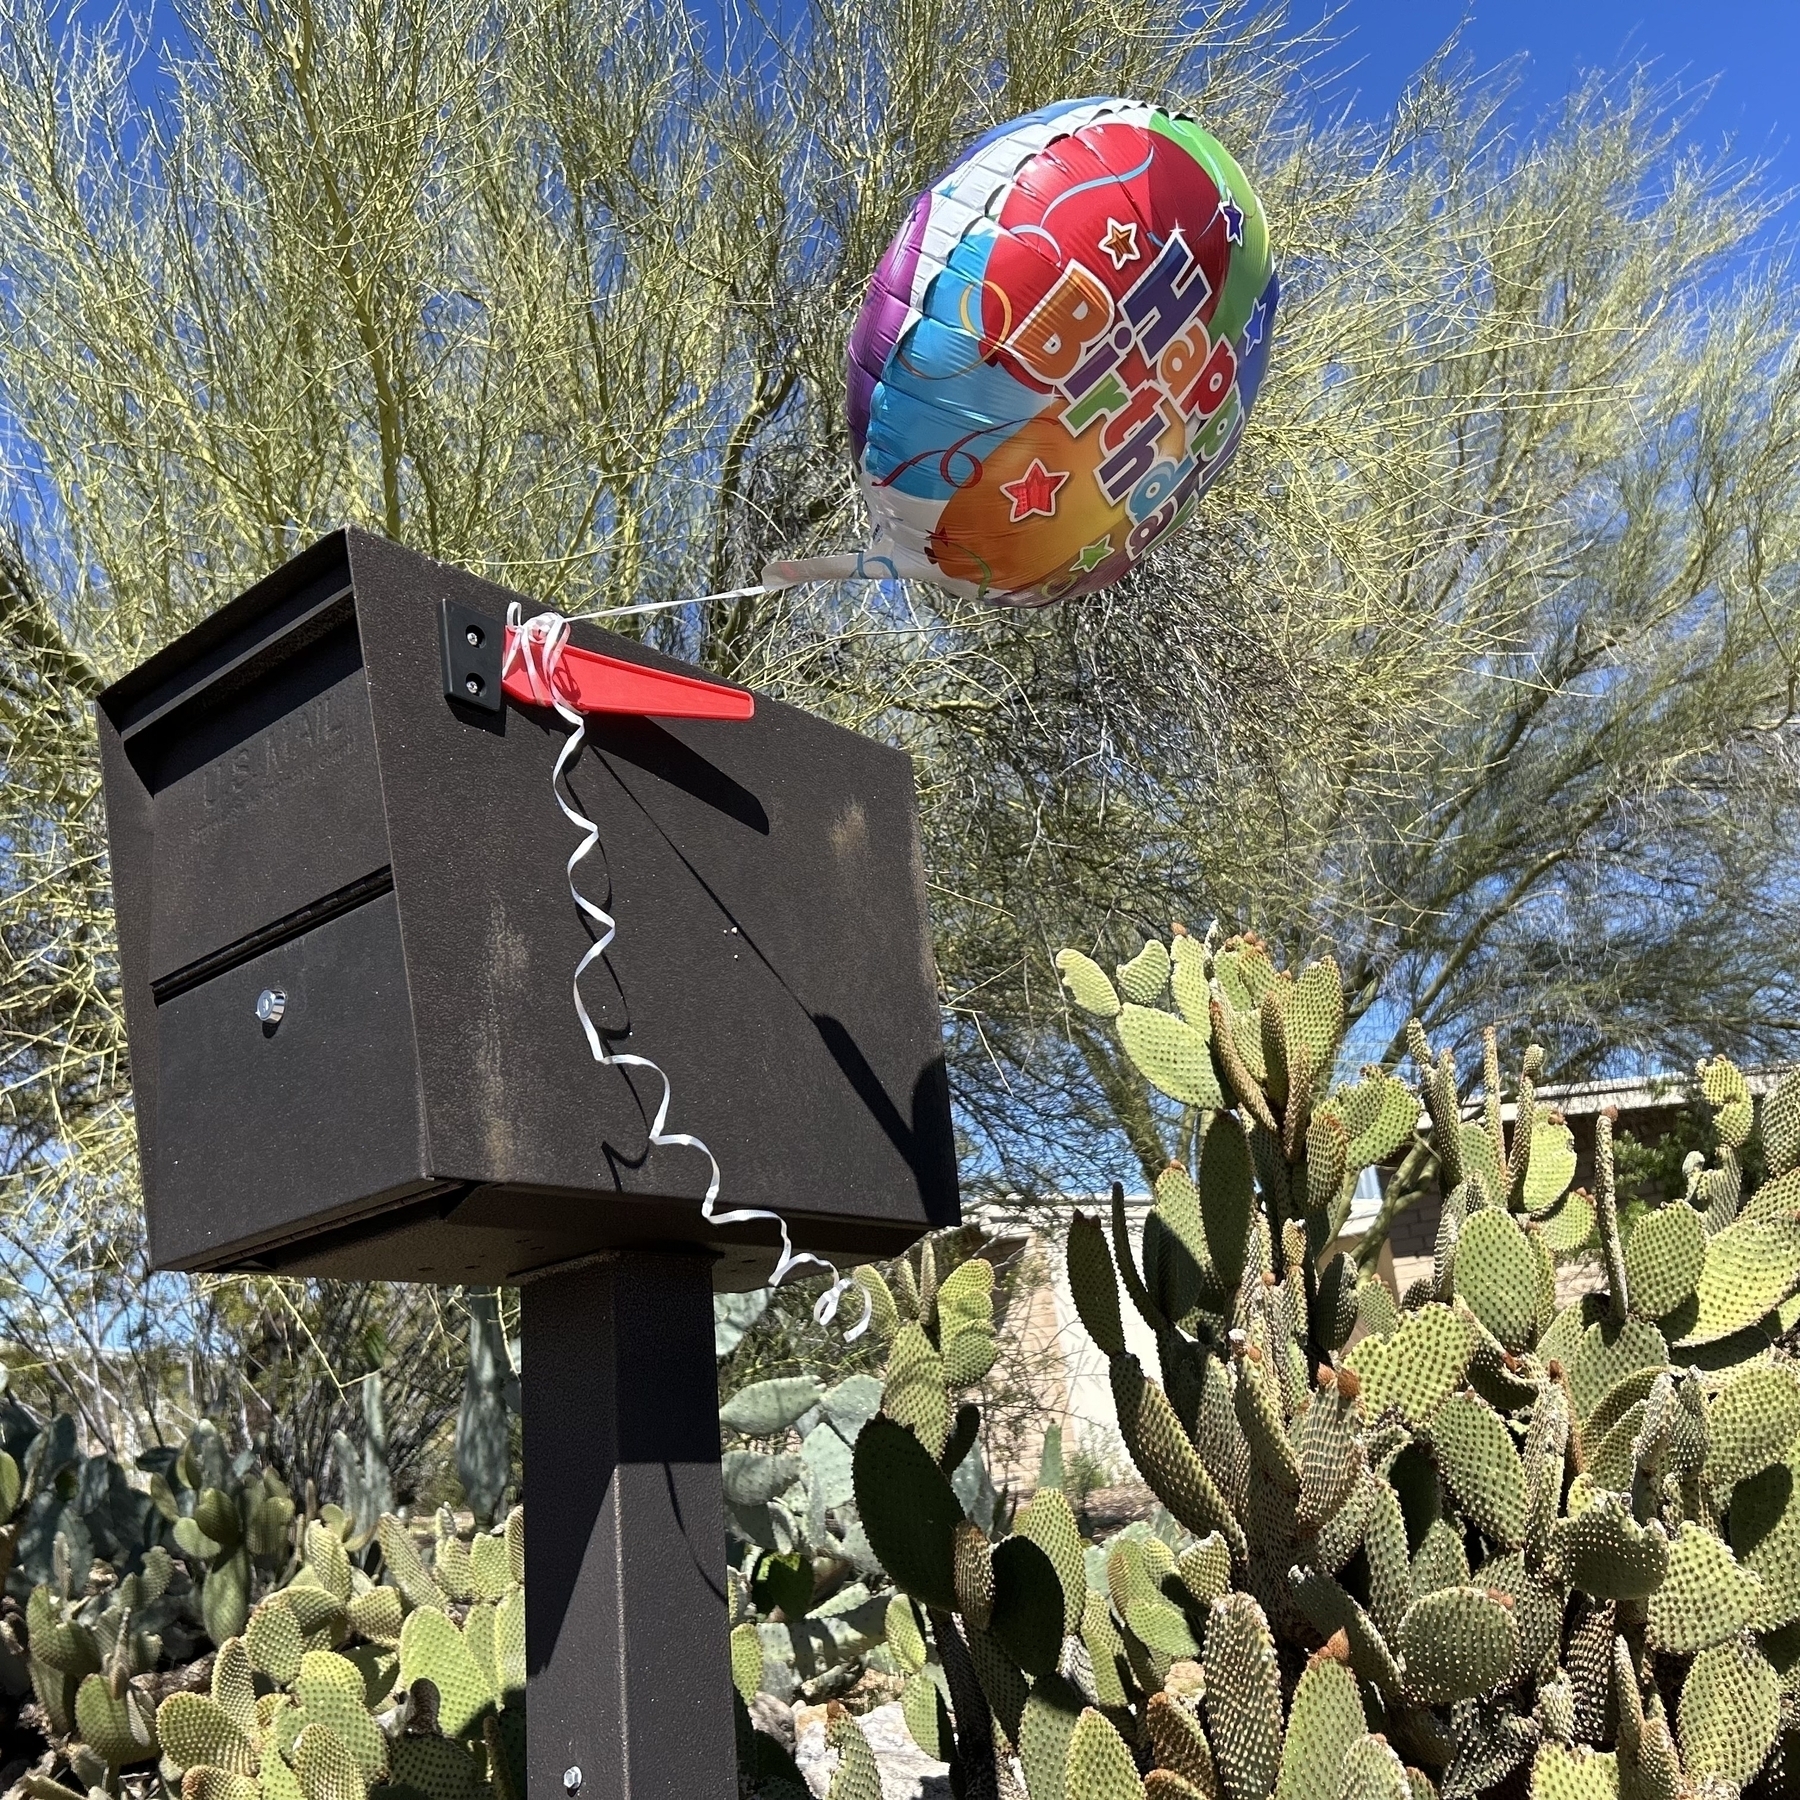 A "Happy Birthday" balloon tied to a mailbox flies in the wind. Prickly pear cactus and a mesquite tree are in the background.